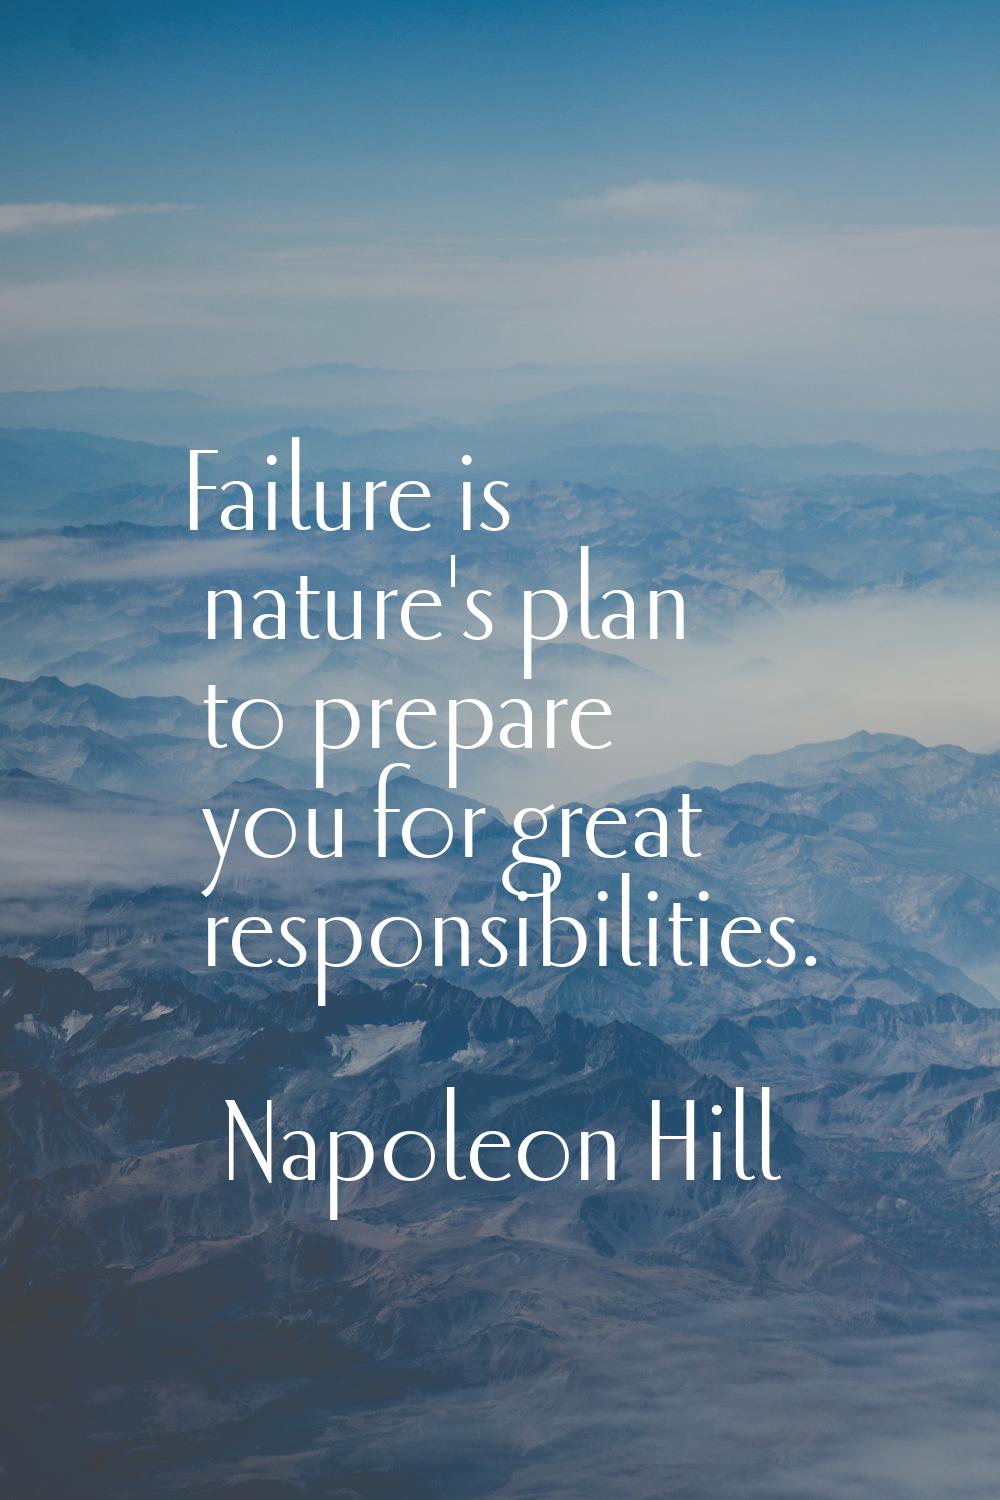 Failure is nature's plan to prepare you for great responsibilities.